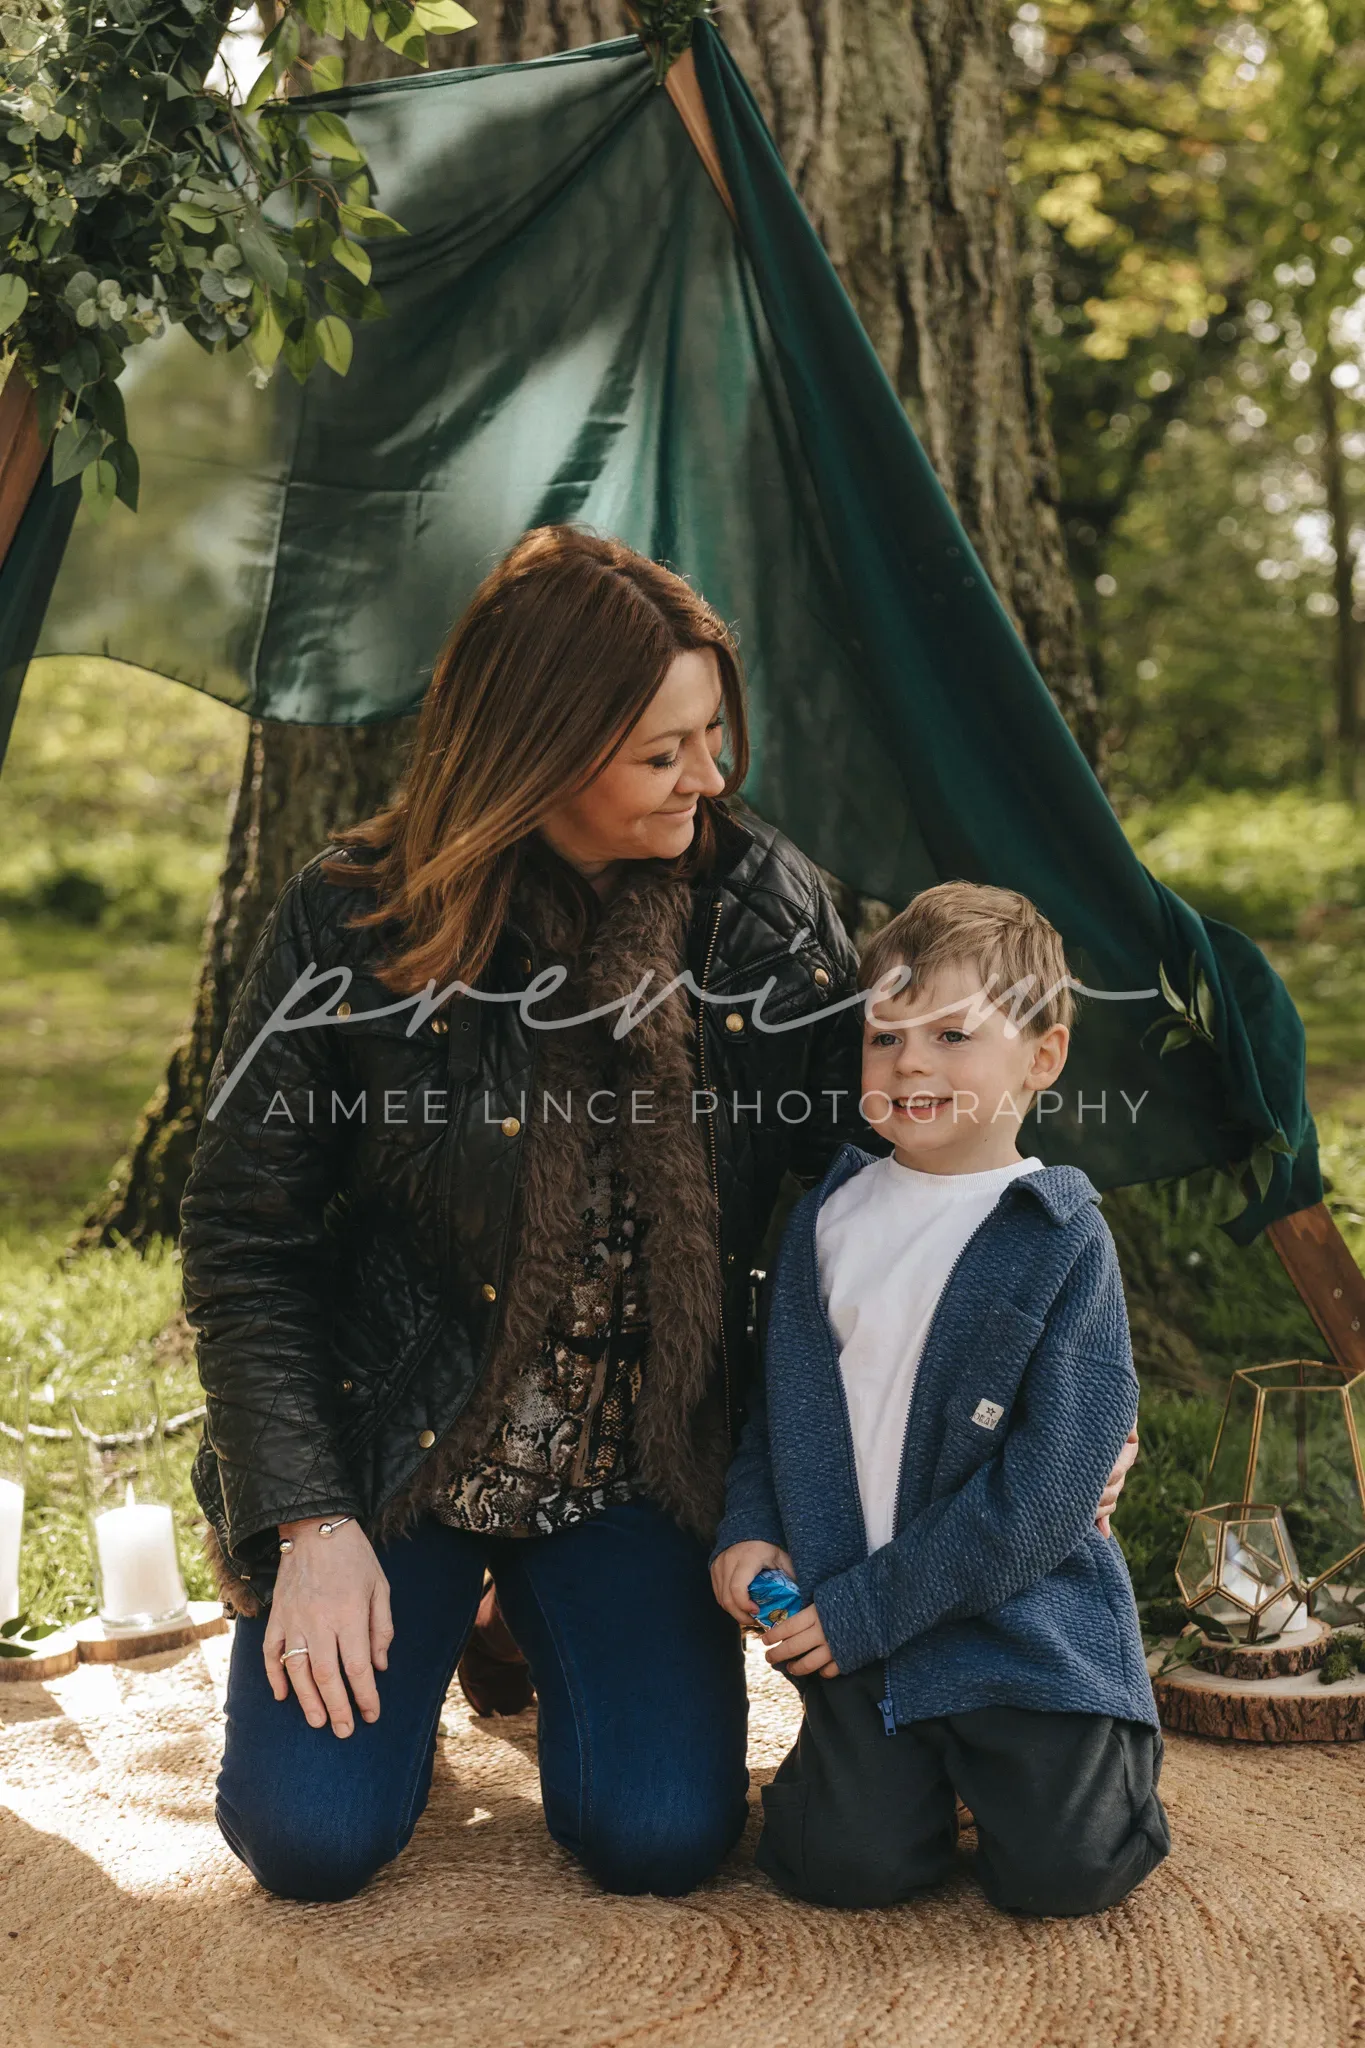 A woman and a young boy kneel together under a makeshift tent in a forest. the woman, wearing a black jacket and blue jeans, lovingly looks at the boy who is dressed in a blue sweater and white shirt. soft sunlight filters through the trees around them.